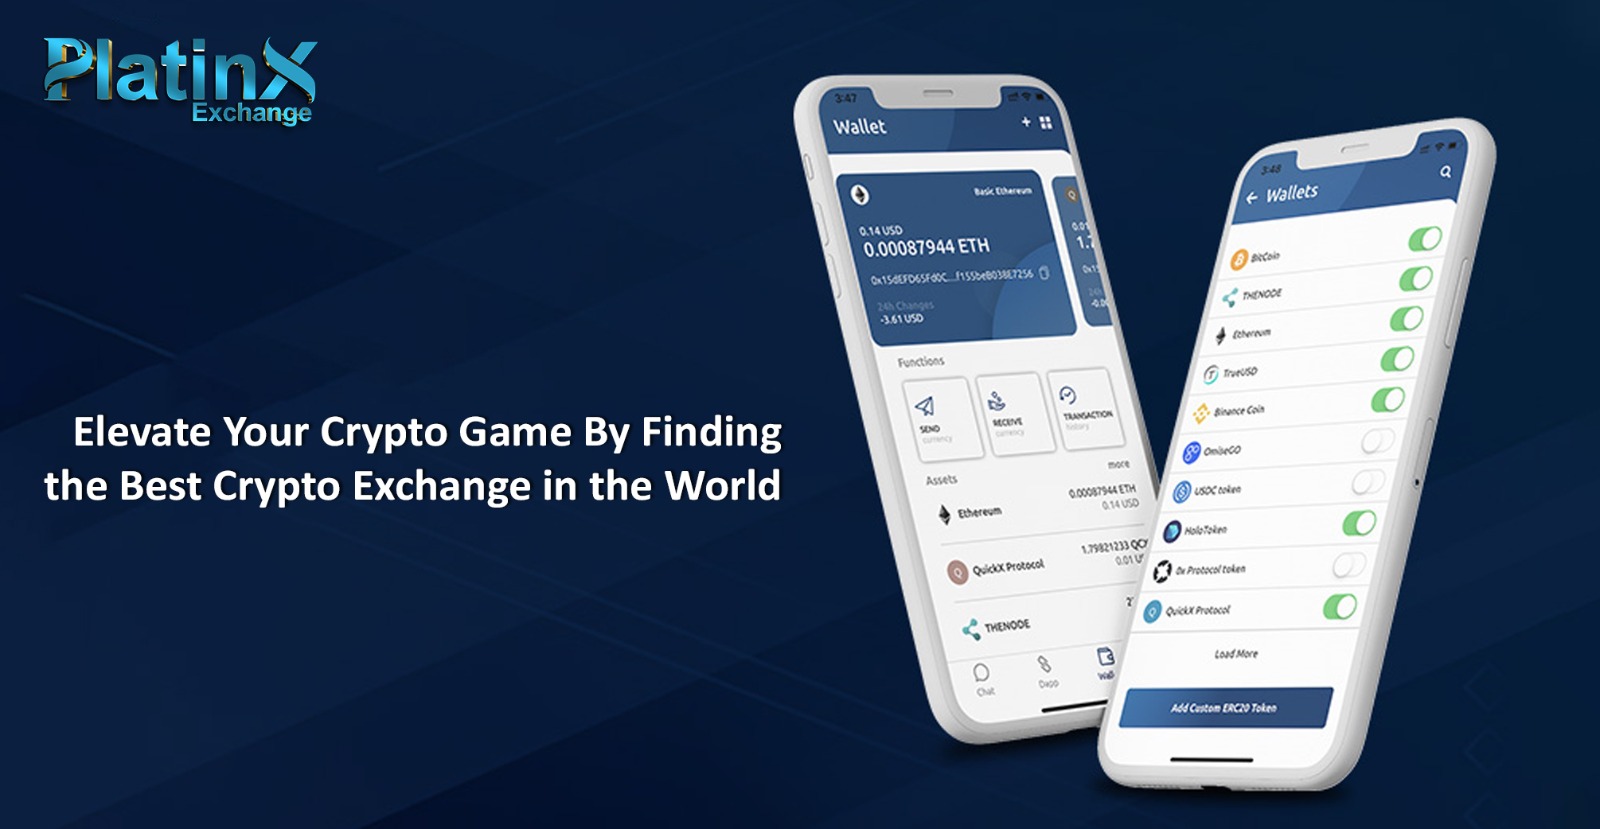 Elevate Your Crypto Game By Finding the Best Crypto Exchange in the World